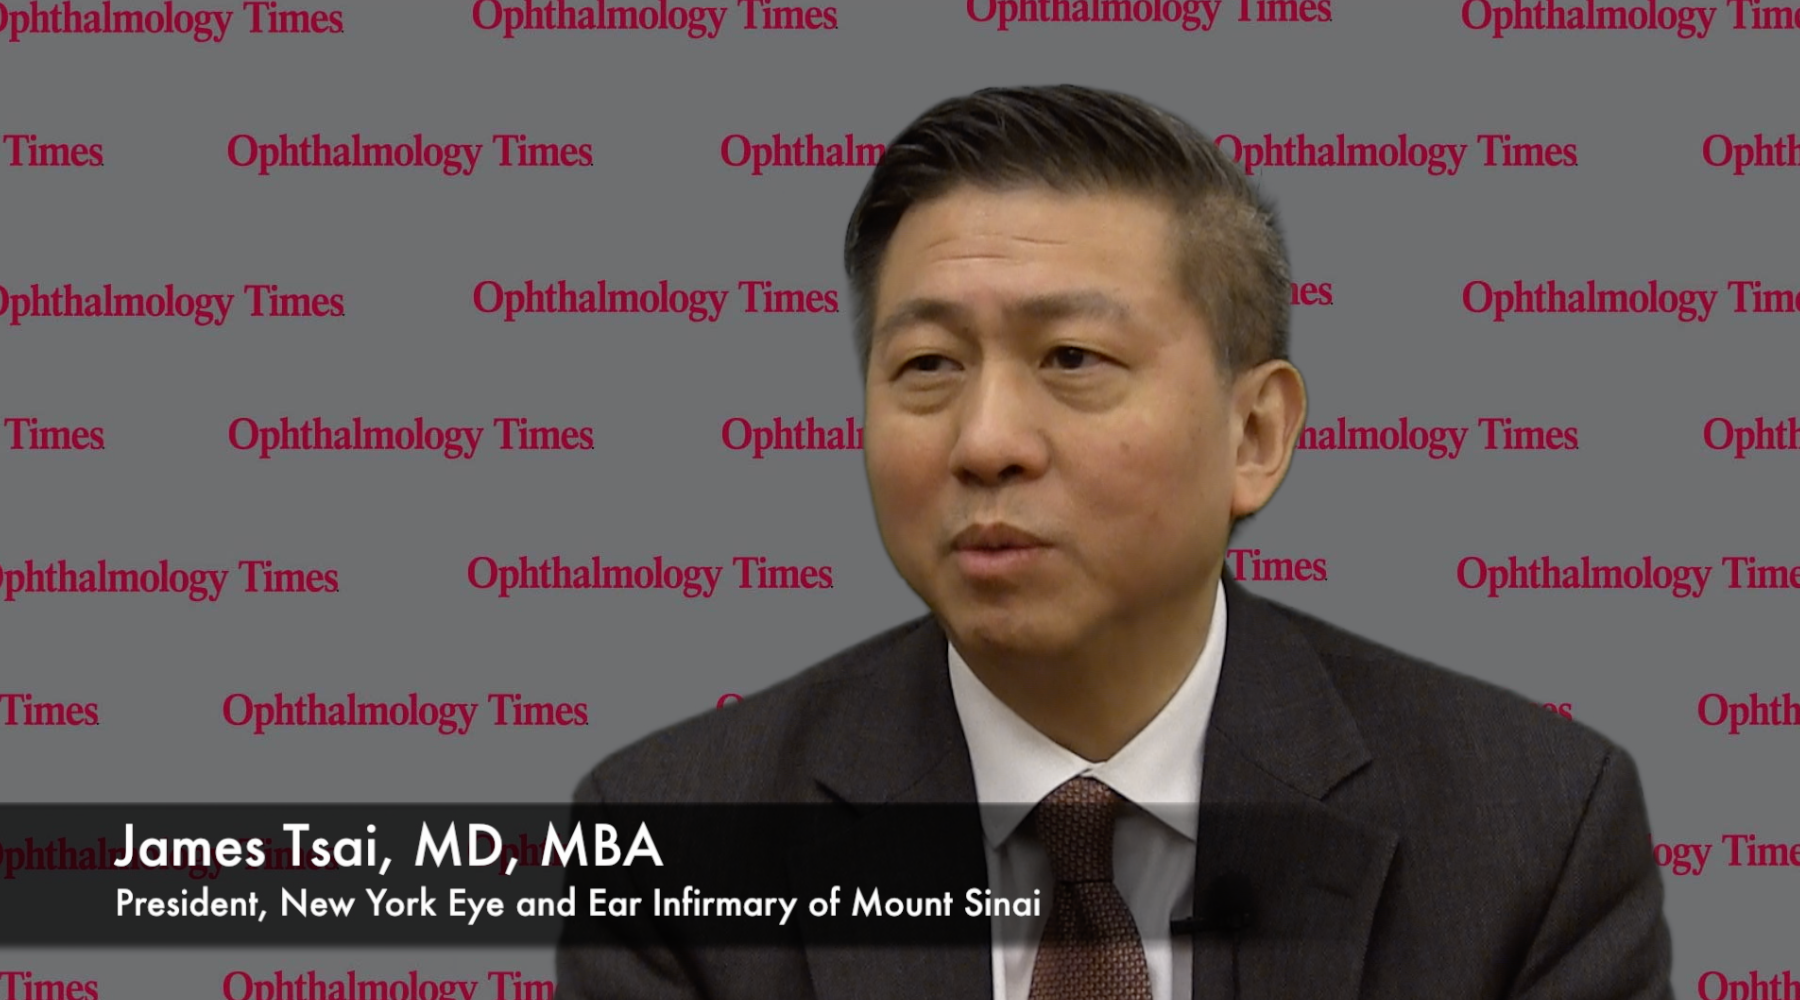 James Tsai, MD, MBA, speaks on diagnosing normal-tension glaucoma in patients 